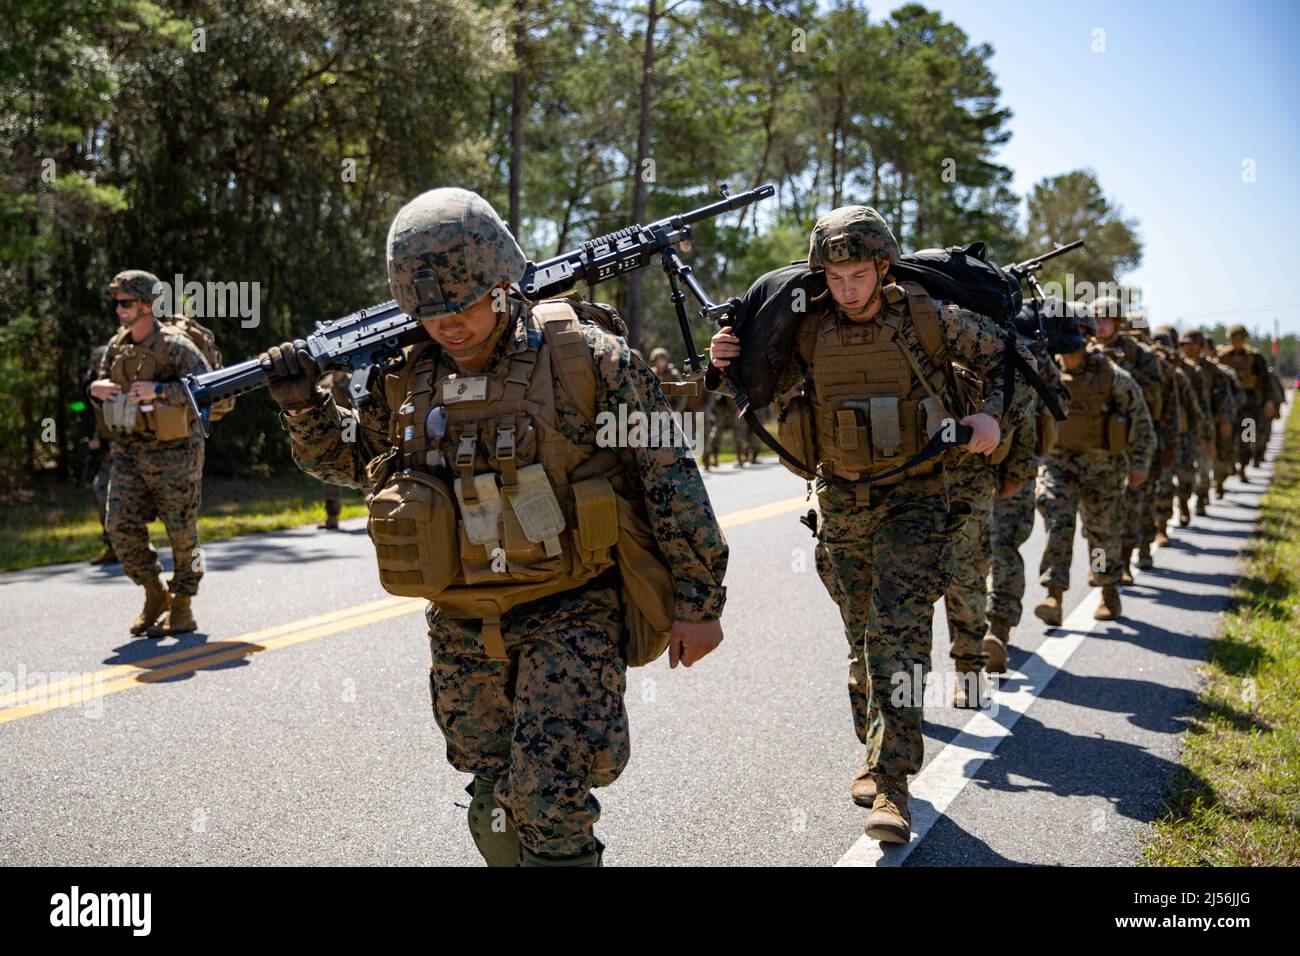 Camp Blanding, Florida, USA. 28th Mar, 2022. U.S. Marines with Combat Logistics Regiment 37, 3rd Marine Logistics Group participate in a hike with M240B medium machine guns during exercise Atlantic Dragon on Camp Blanding, Florida, United States, March 28, 2022. Atlantic Dragon is a force generation exercise pushing CLR-37 as an arrival assembly operations group to provide tactical logistics support to III Marine Expeditionary Force. The exercise consists of an experimental maritime prepositioned force's offload tactics of military equipment that supports field exercise training to i Stock Photo